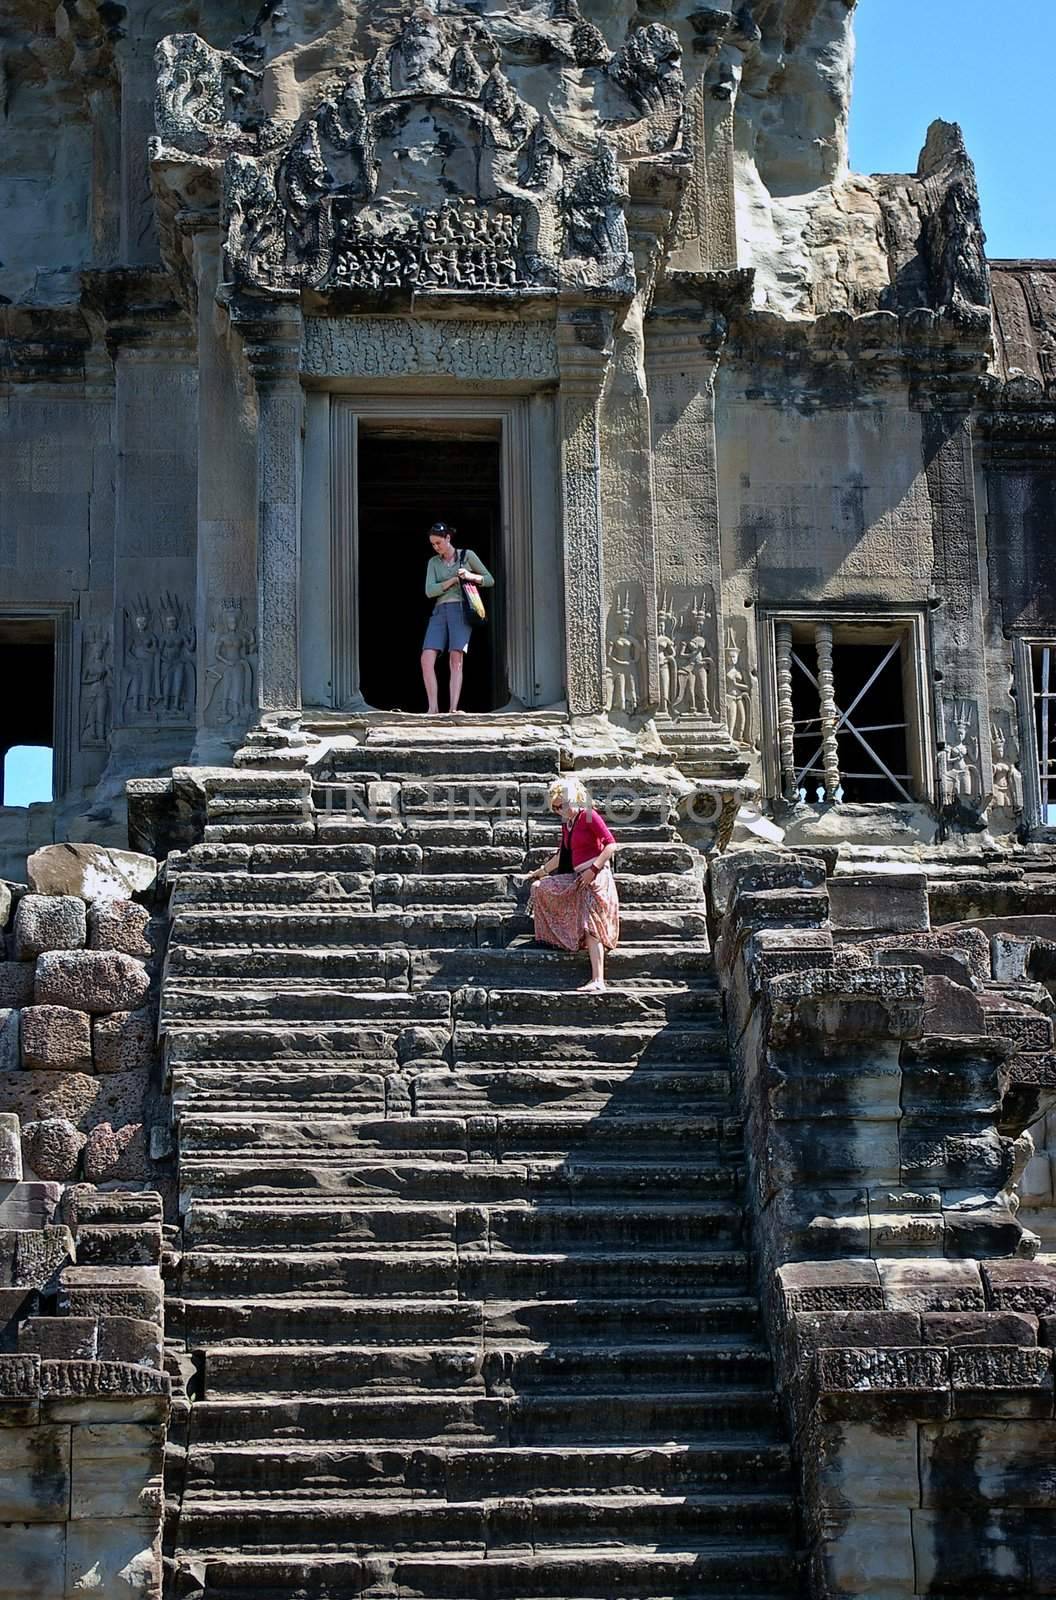 Tourists going down steep steps at Angkor Wat, Siem Reap, Cambodia. Angkor Wat, considered to be one of the Wonders of the World, is one of the most popular destinations in Southeast Asia and extremely important both historically and religiously.